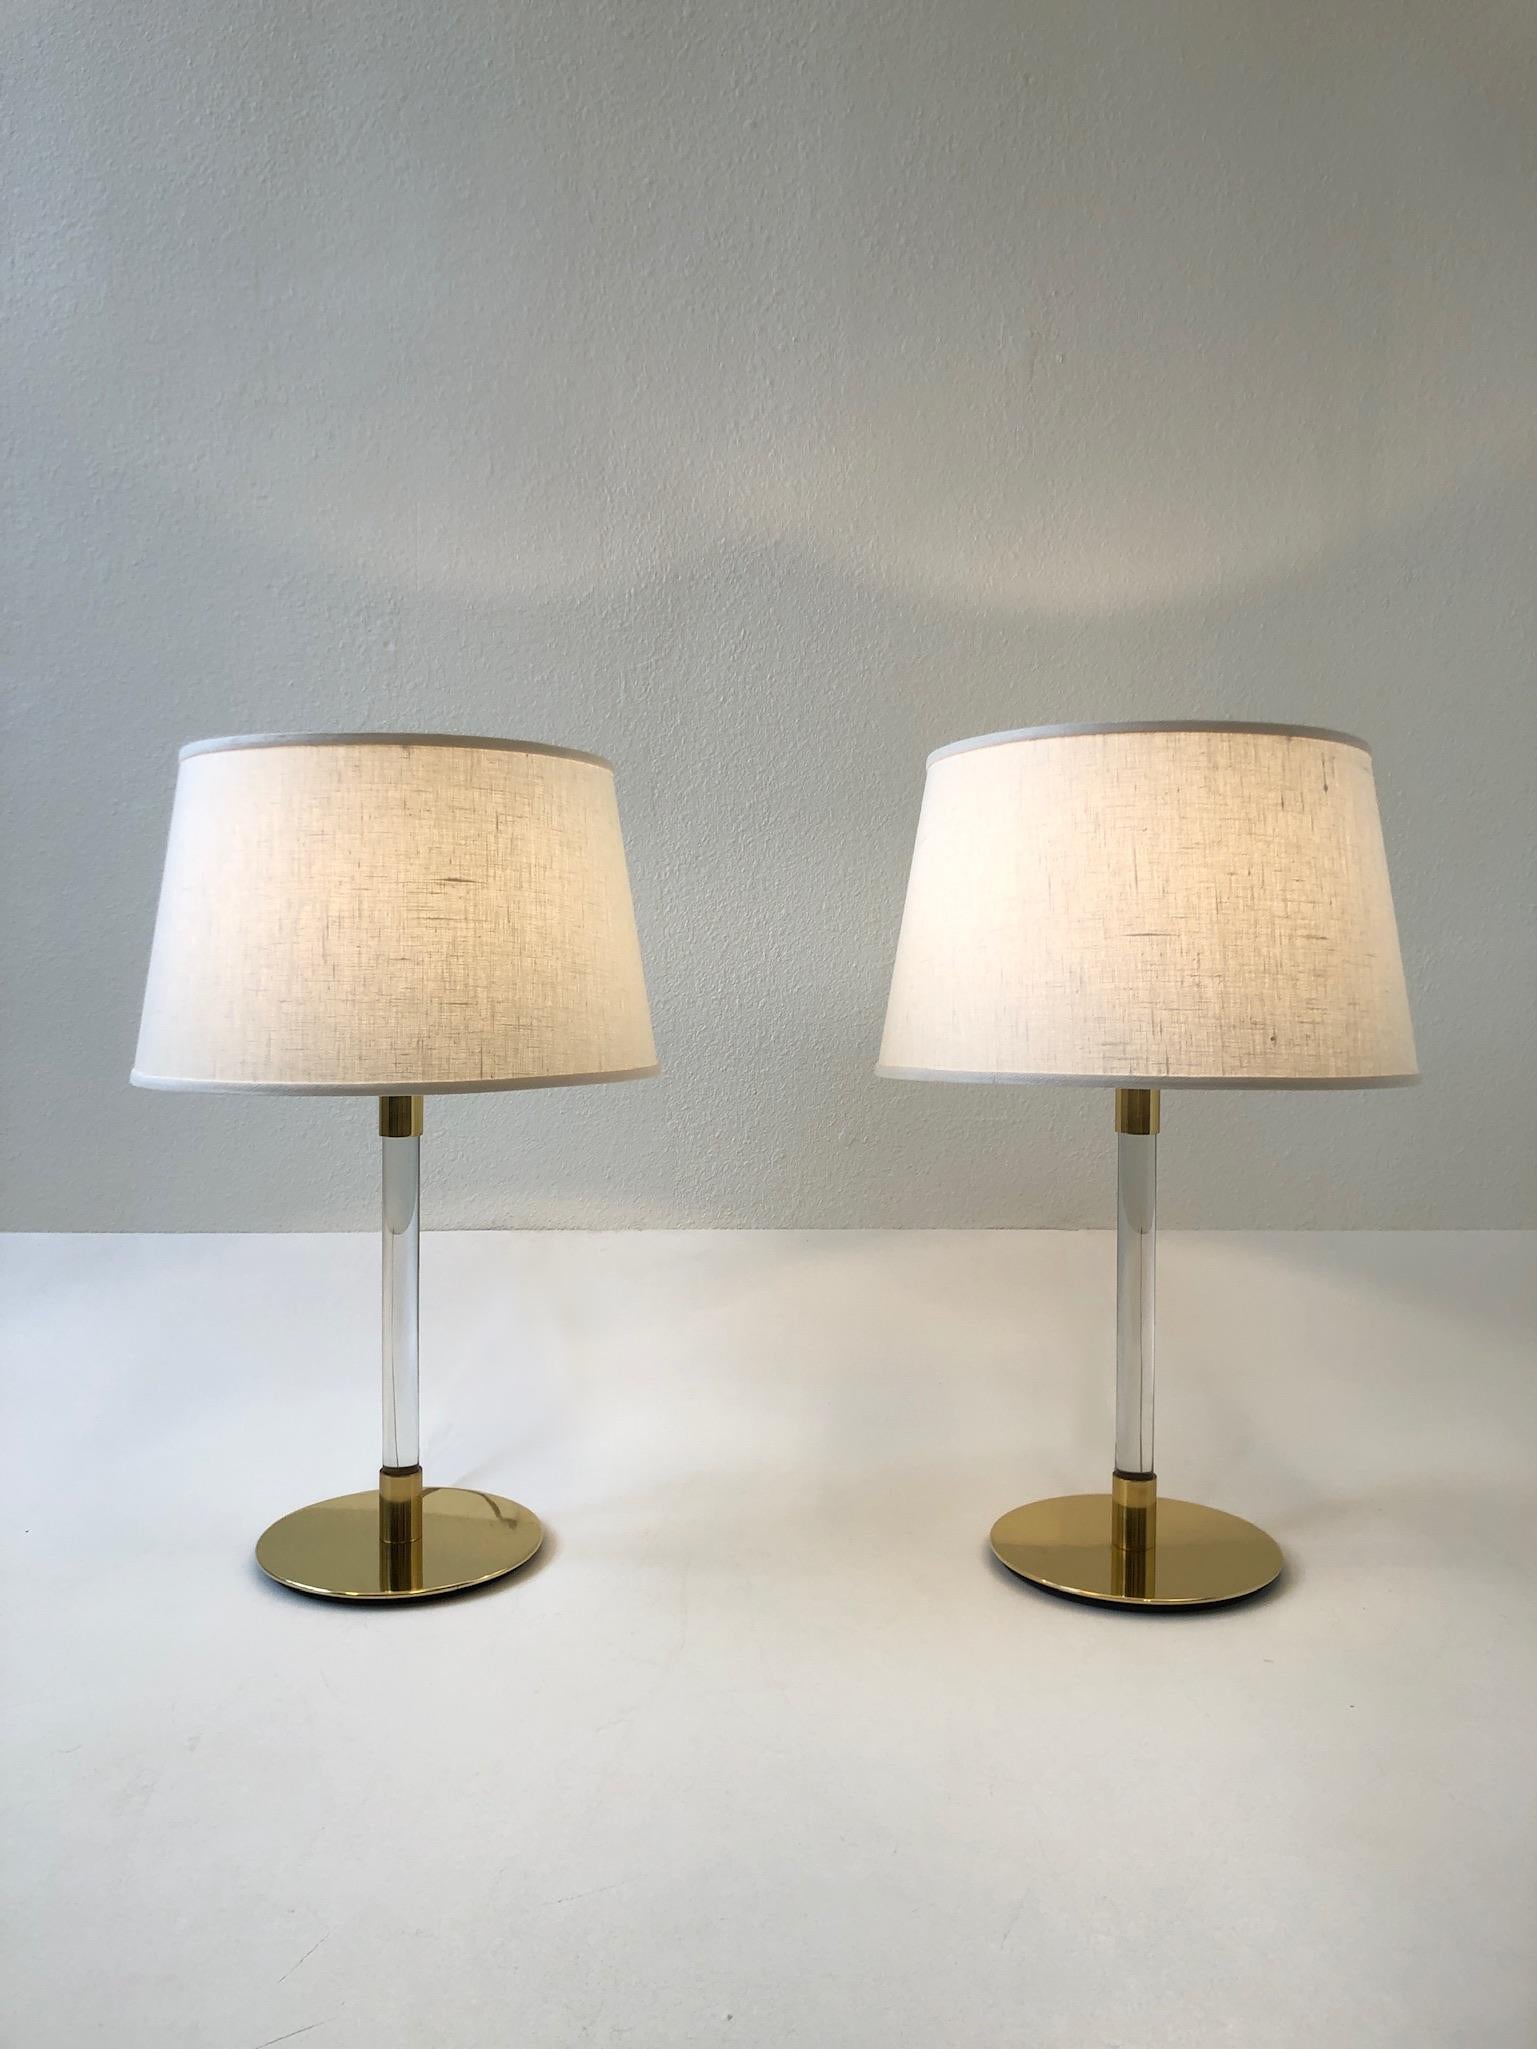 A beautiful pair of polish brass and clear glass table lamps design by Hansen Lamps New York and made in Spain by Metalarte.
The lamps show minor wear consistent with age (see detail photos).
New vanilla linen shades.
Measurements: 16.25”